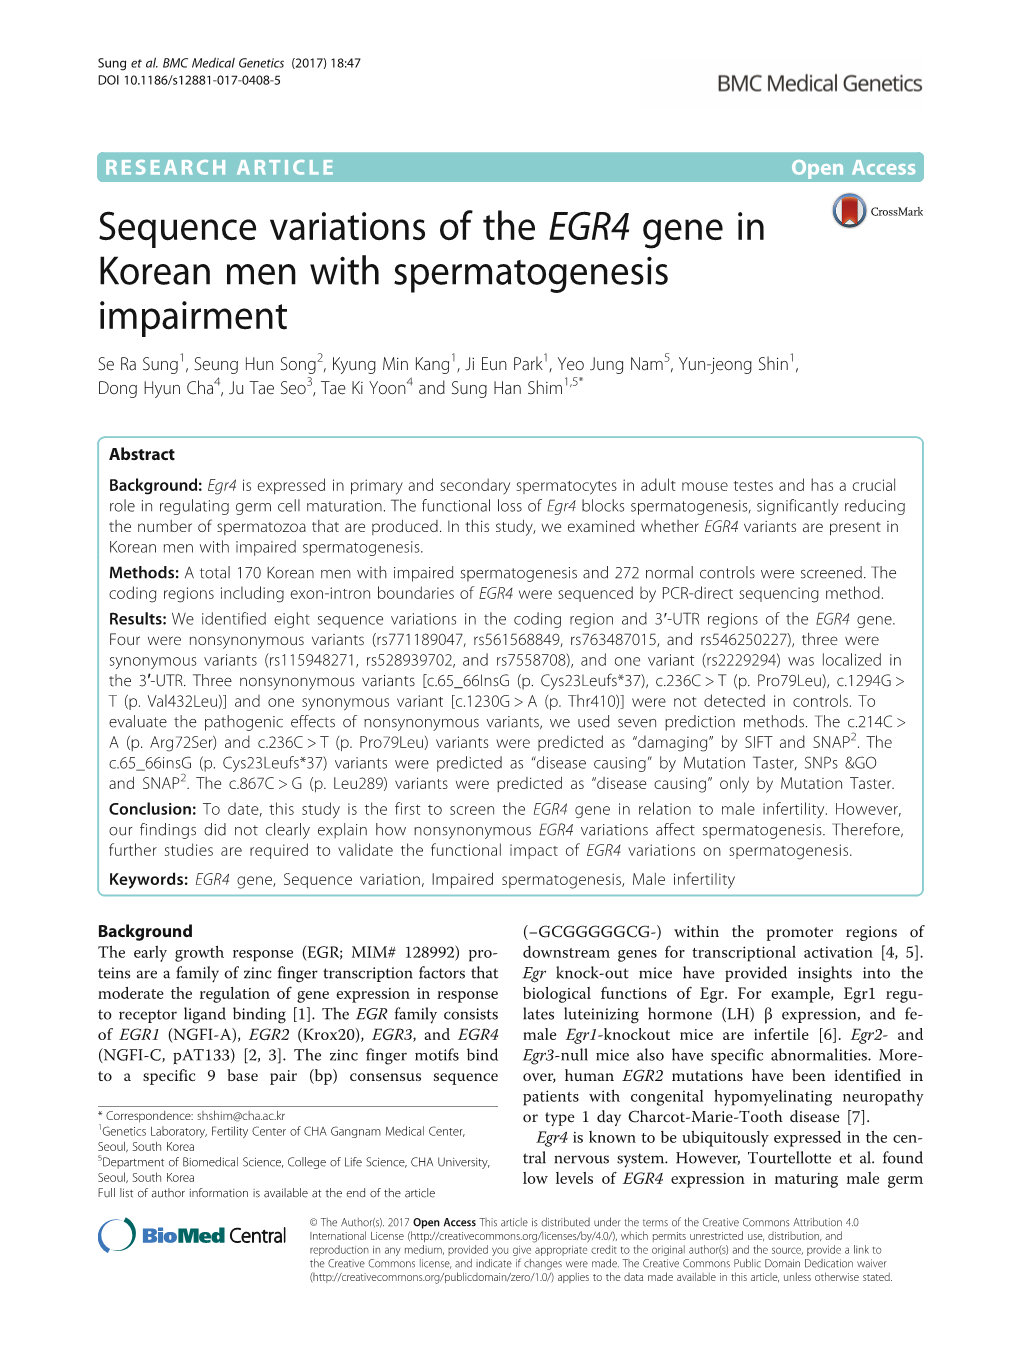 Sequence Variations of the EGR4 Gene in Korean Men With